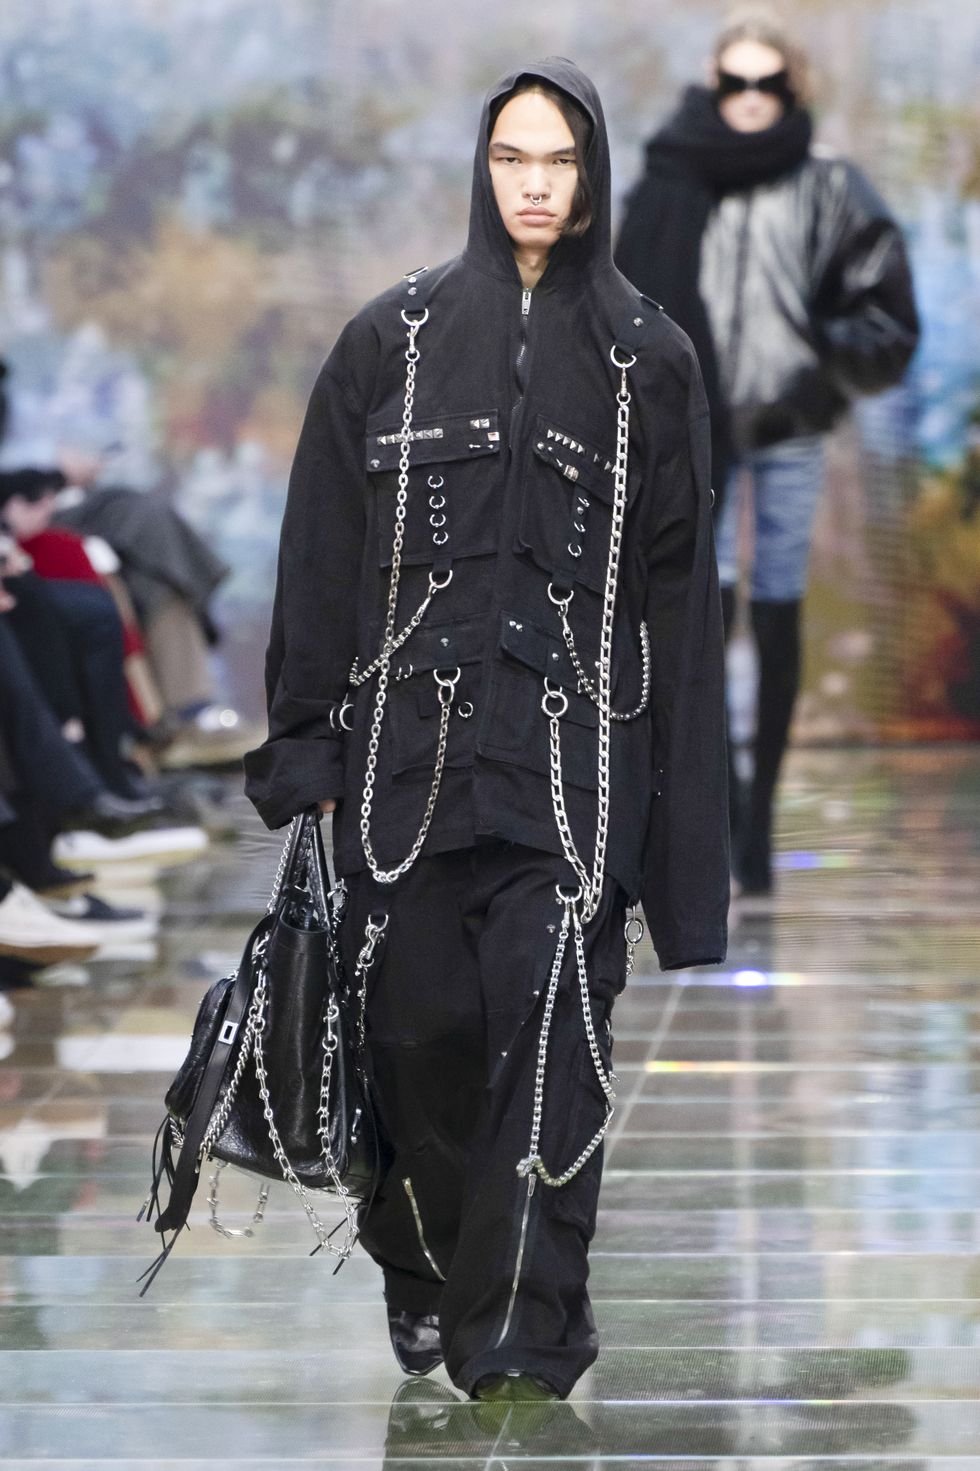 paris, france march 03 a model walks the runway during the balenciaga ready to wear fallwinter 2024 2025 fashion show as part of the paris fashion week on march 3, 2024 in paris, france photo by victor virgilegamma rapho via getty images